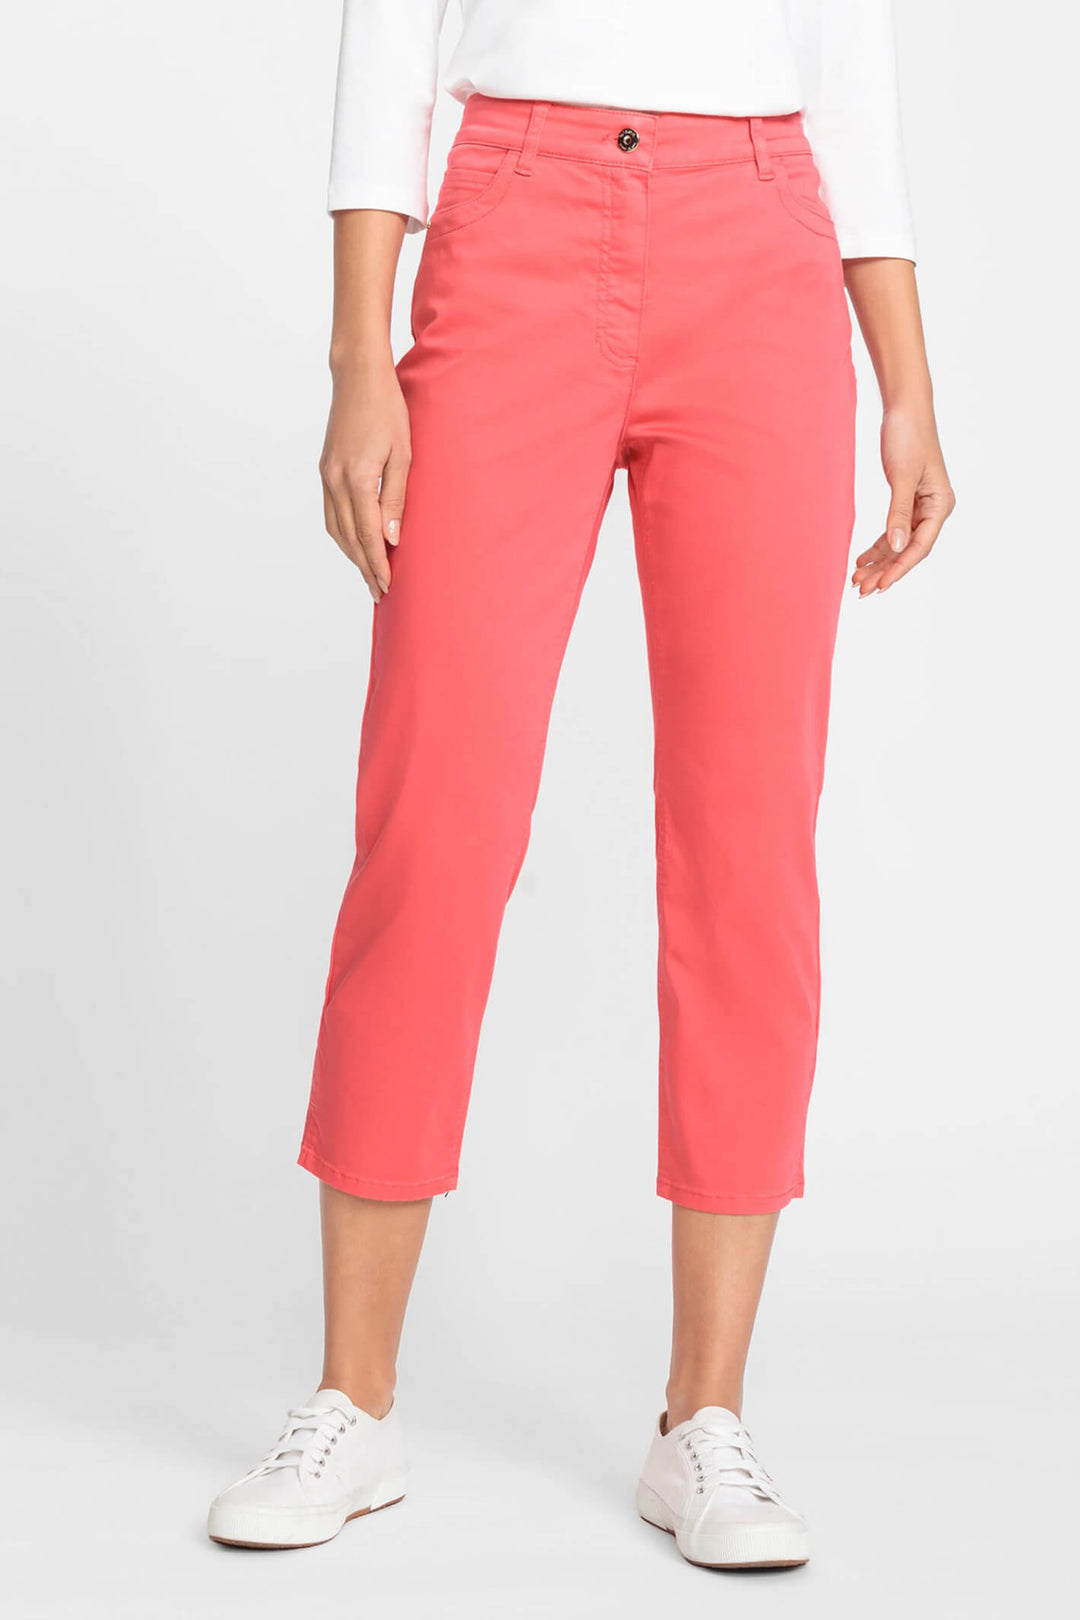 Olsen 14001969 Raspberry Pink Mona Slim Power Stretch Jeans - Experience Boutique